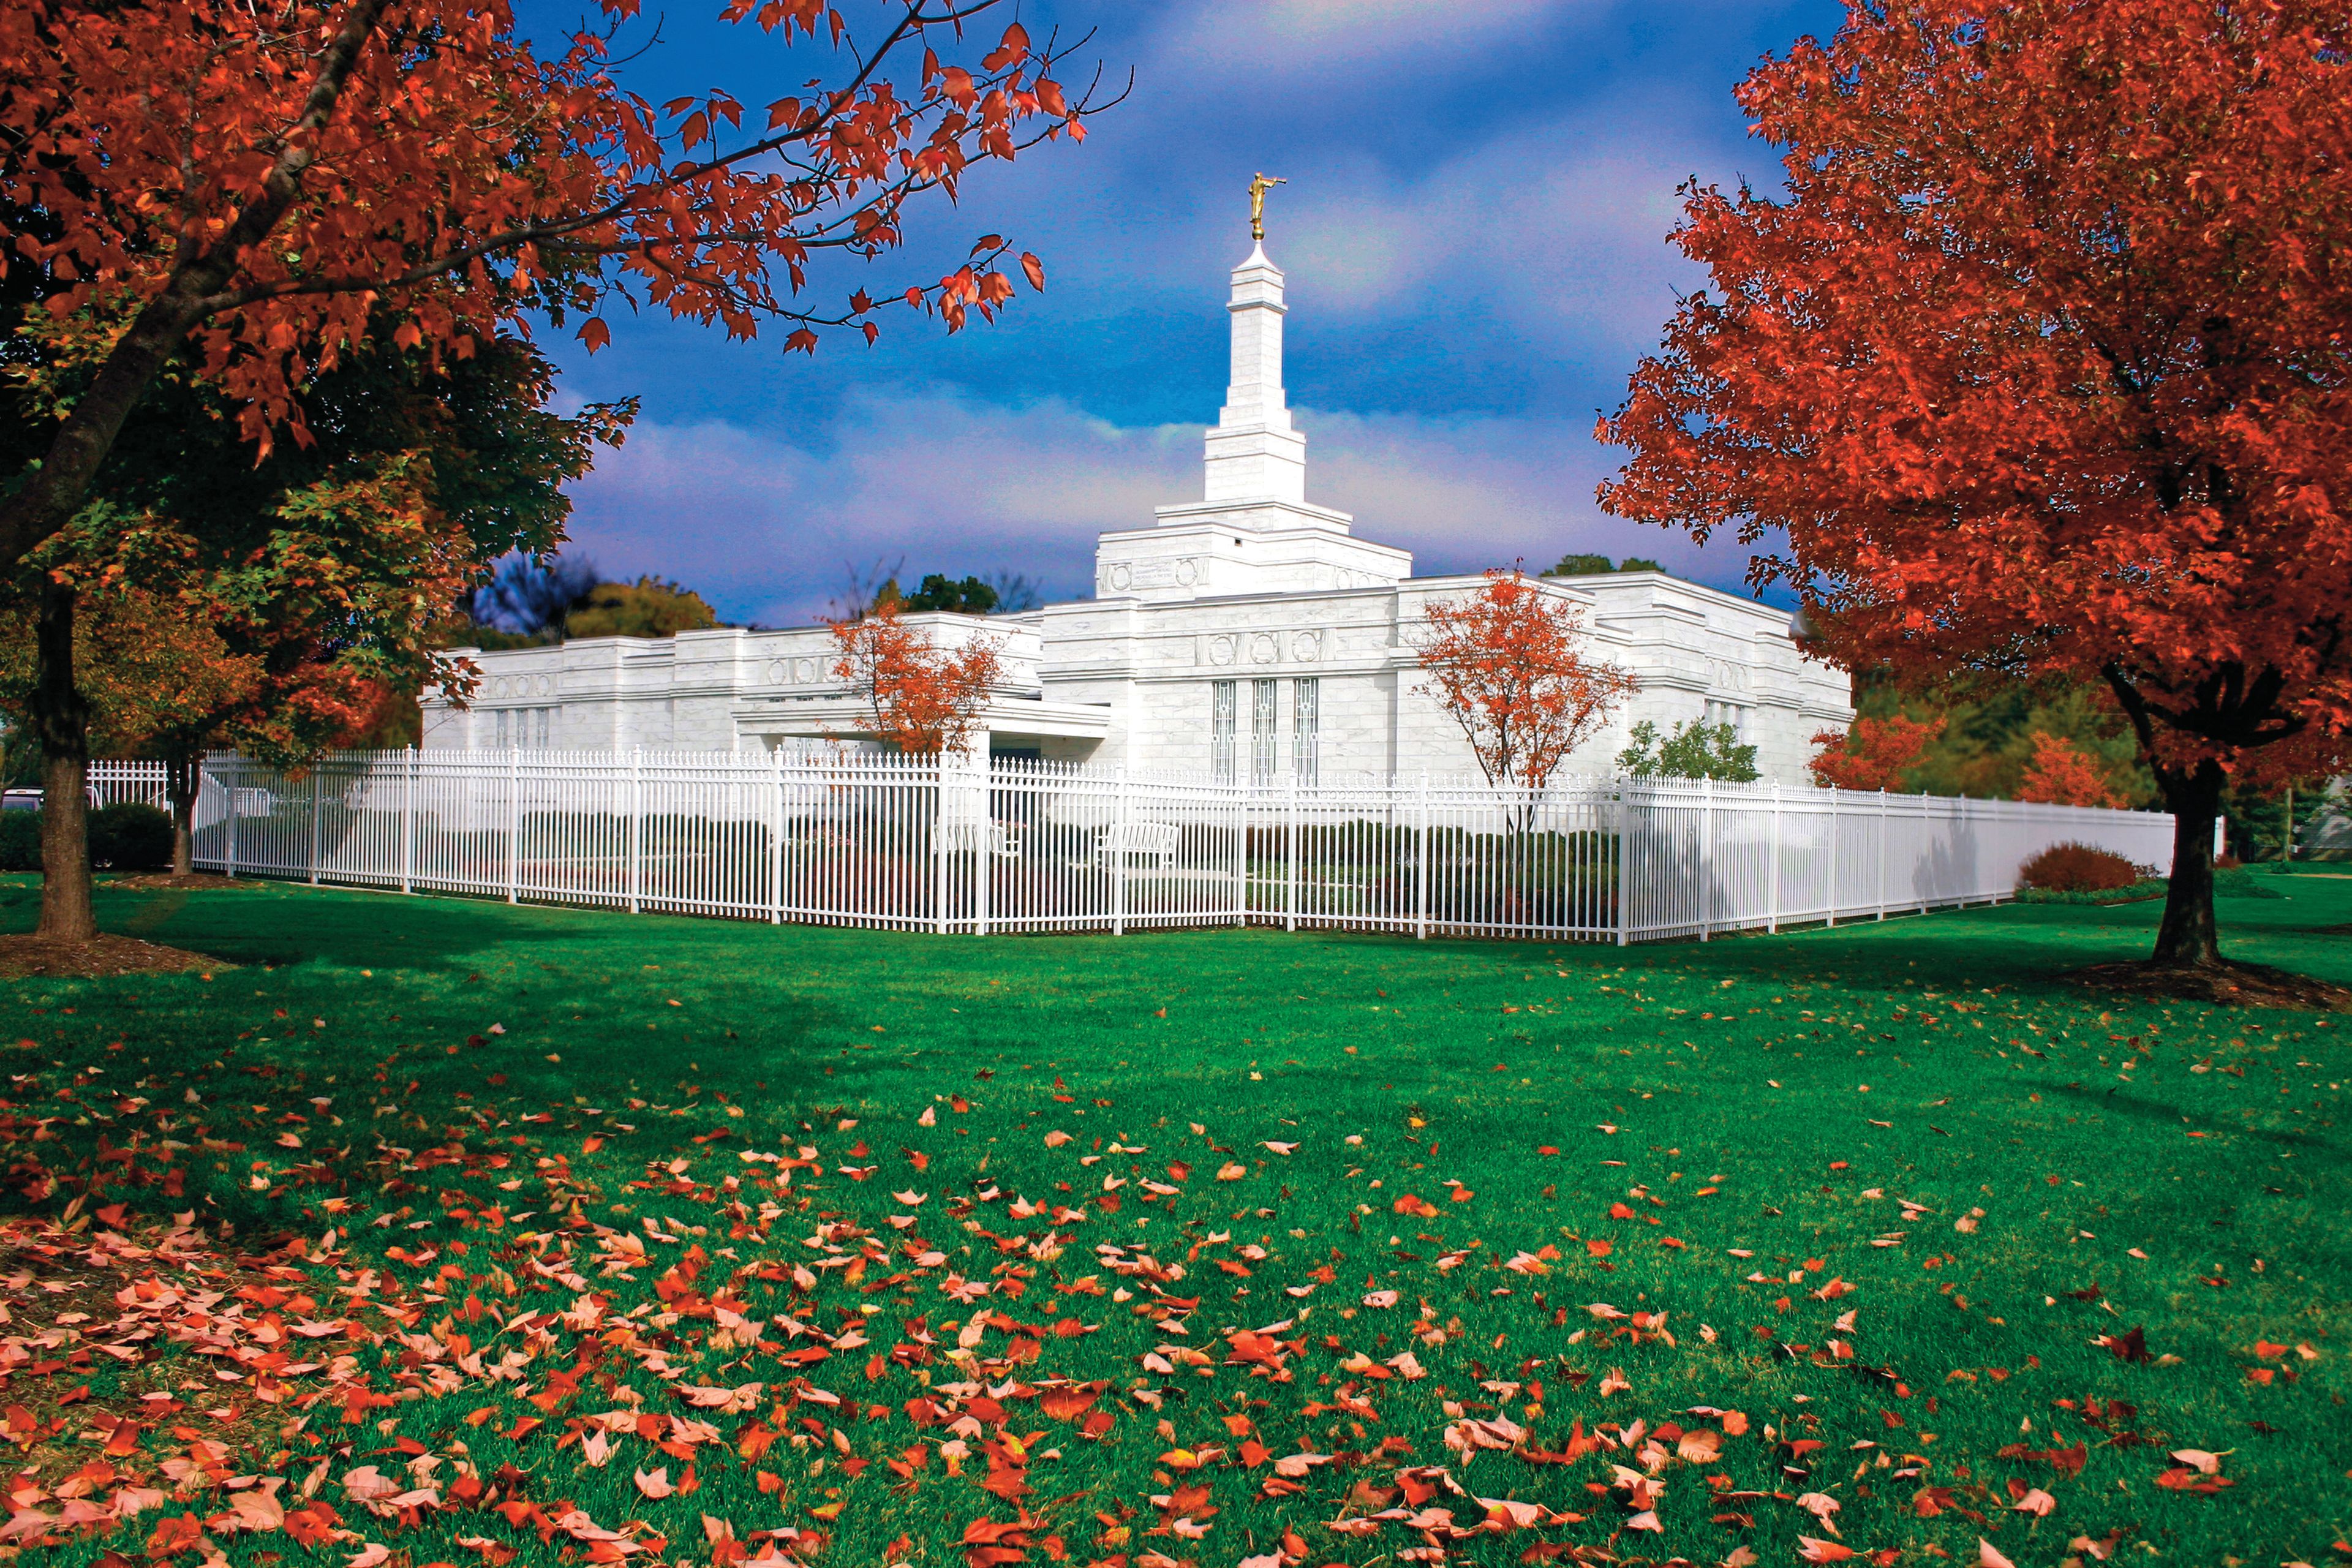 The Columbus Ohio Temple and grounds during the autumn season.